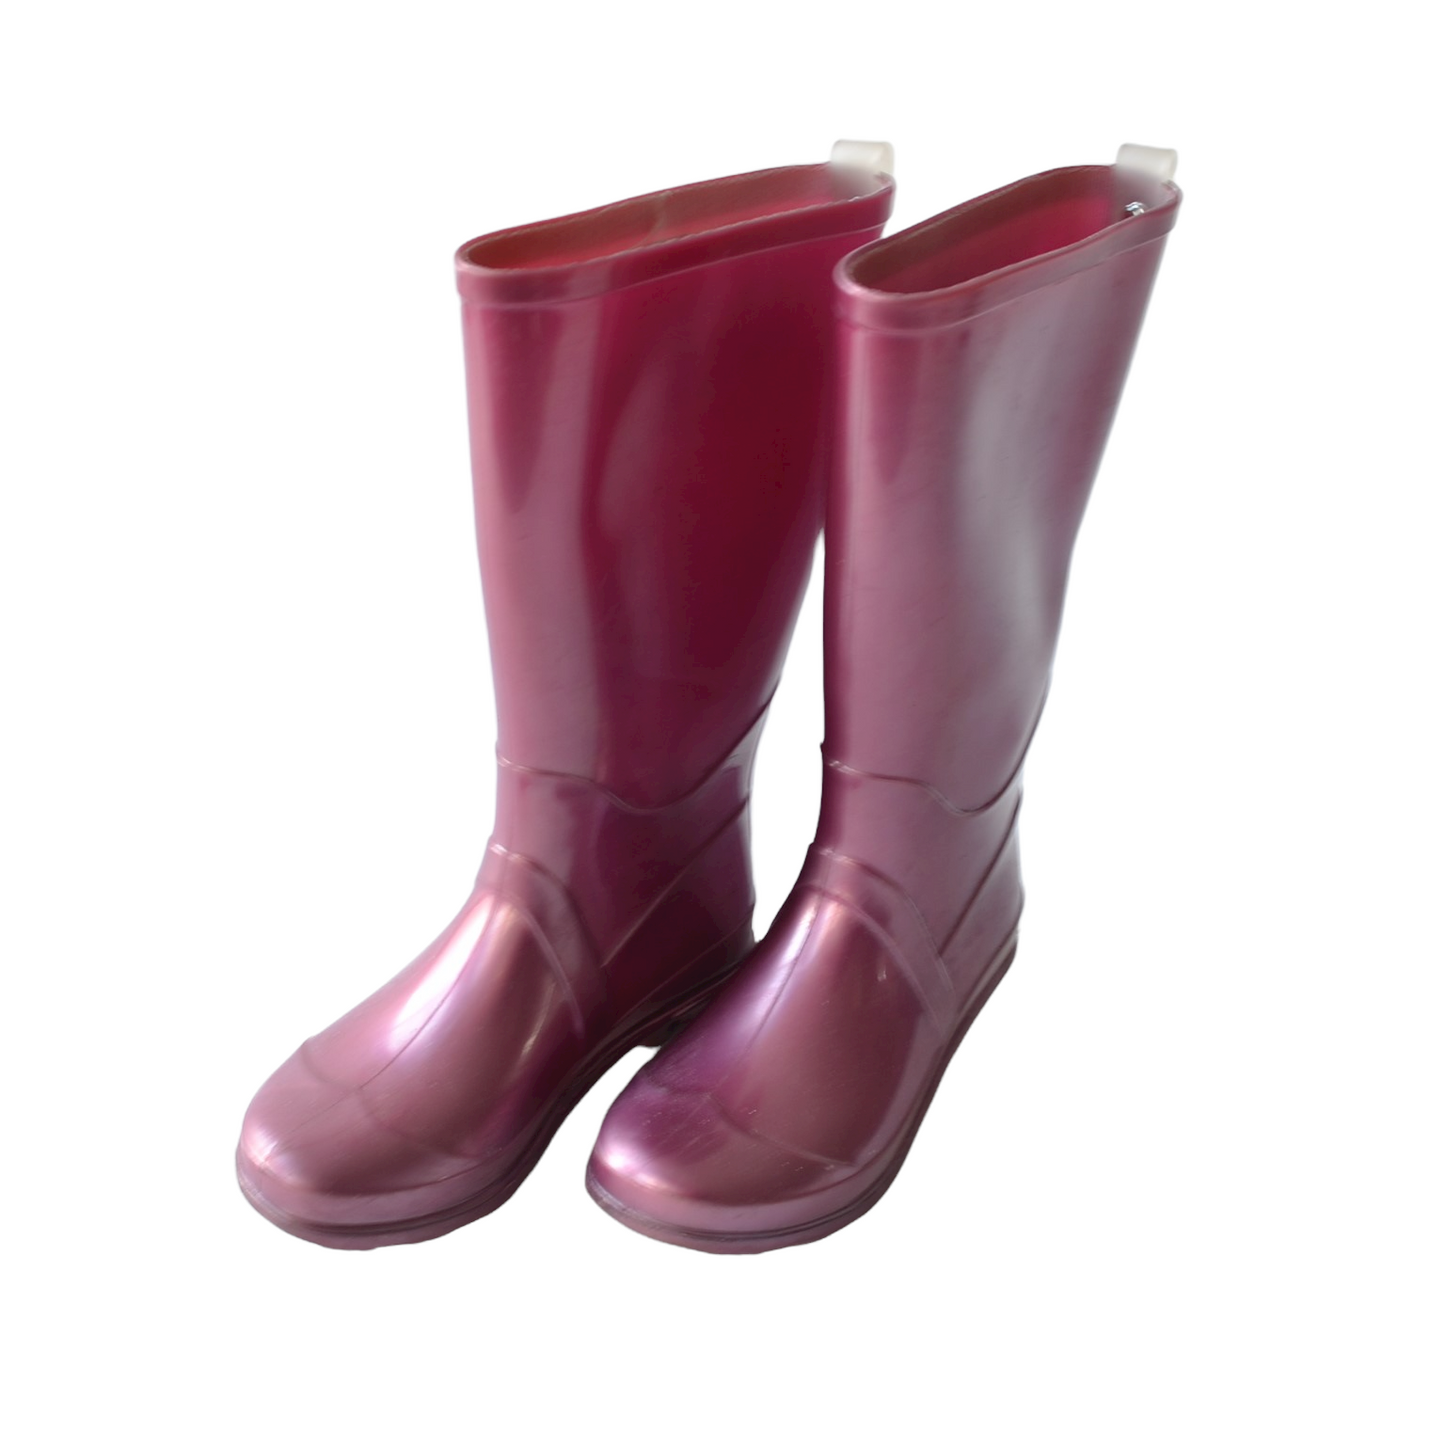 Glossy Pink Wellies Size 11 (jr)